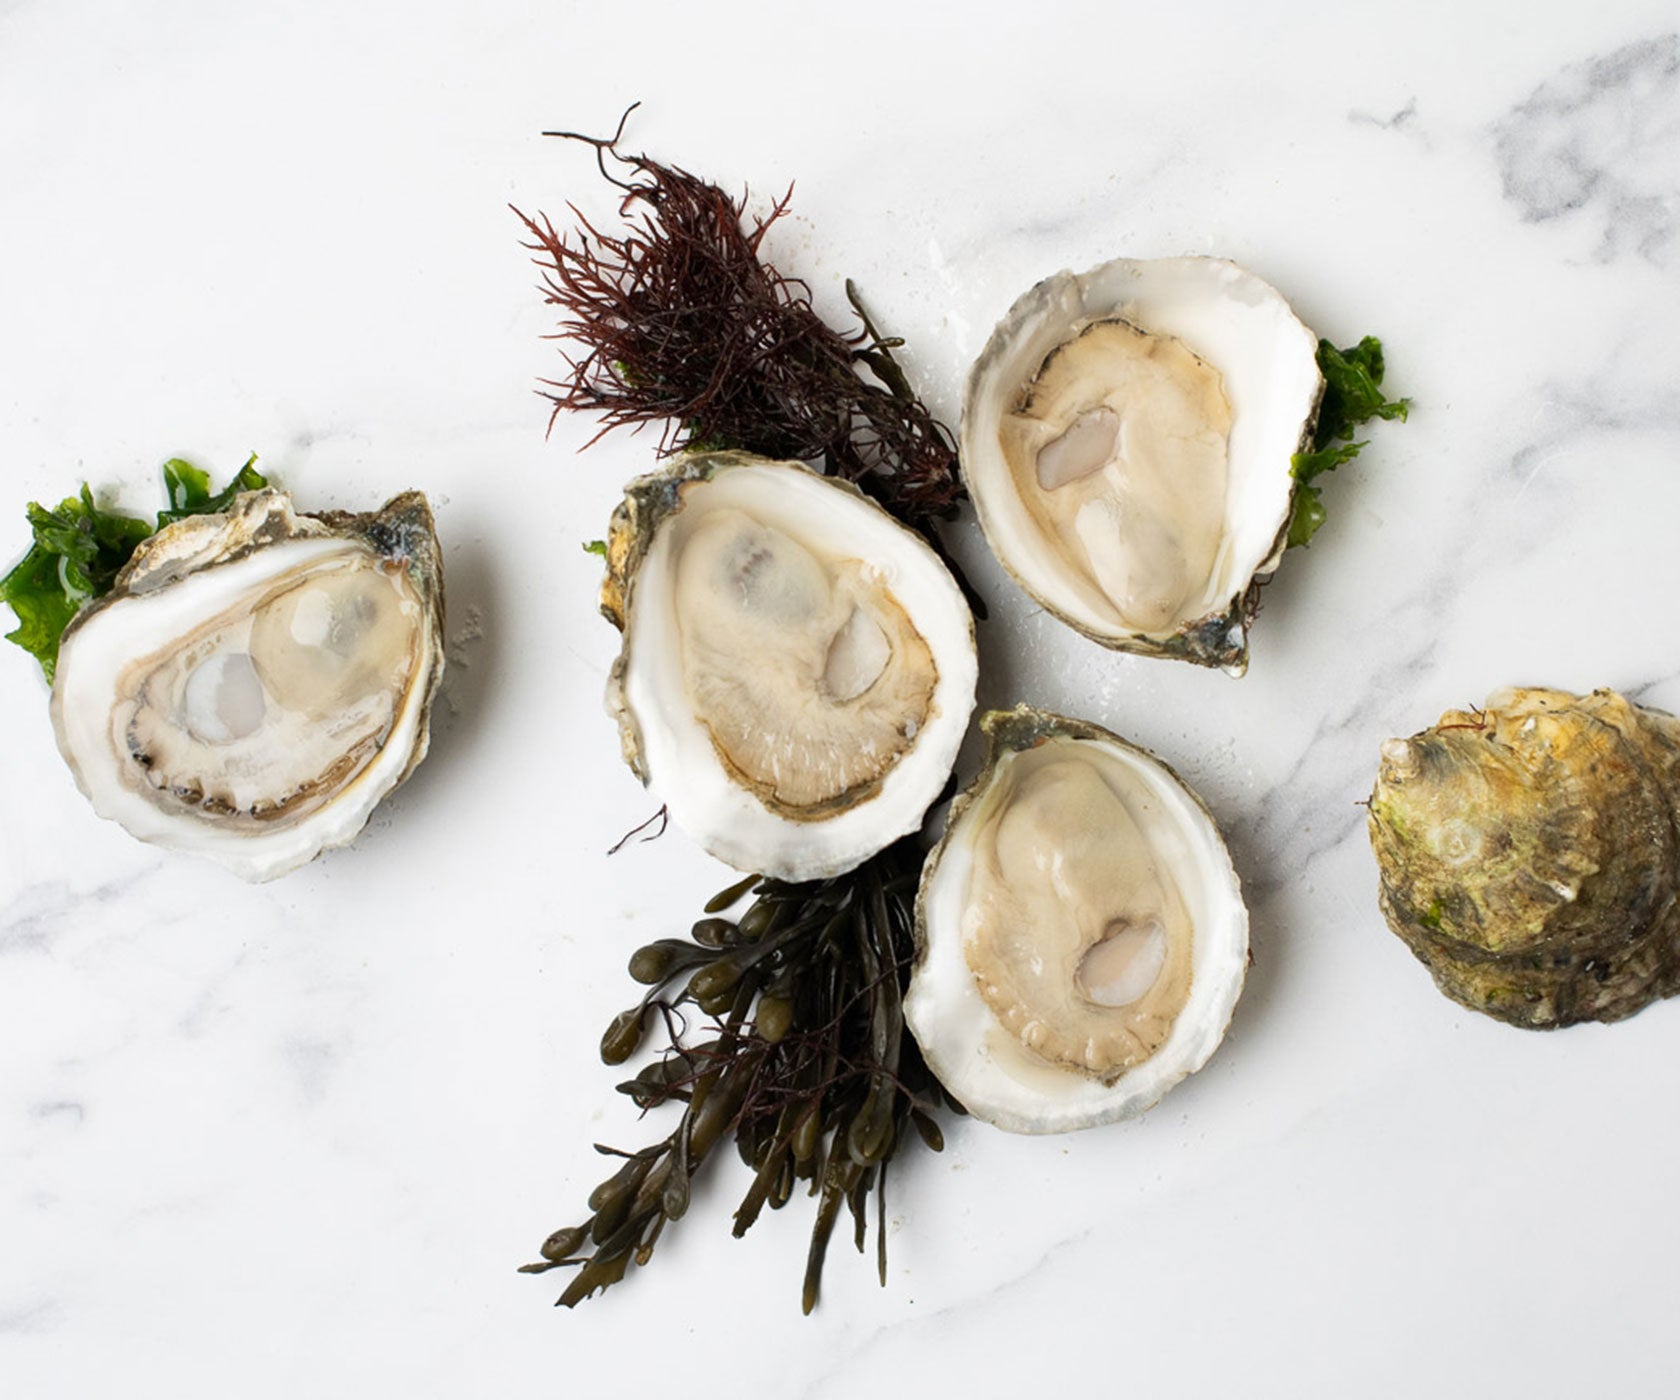 A gentleman's guide to oyster-eating 